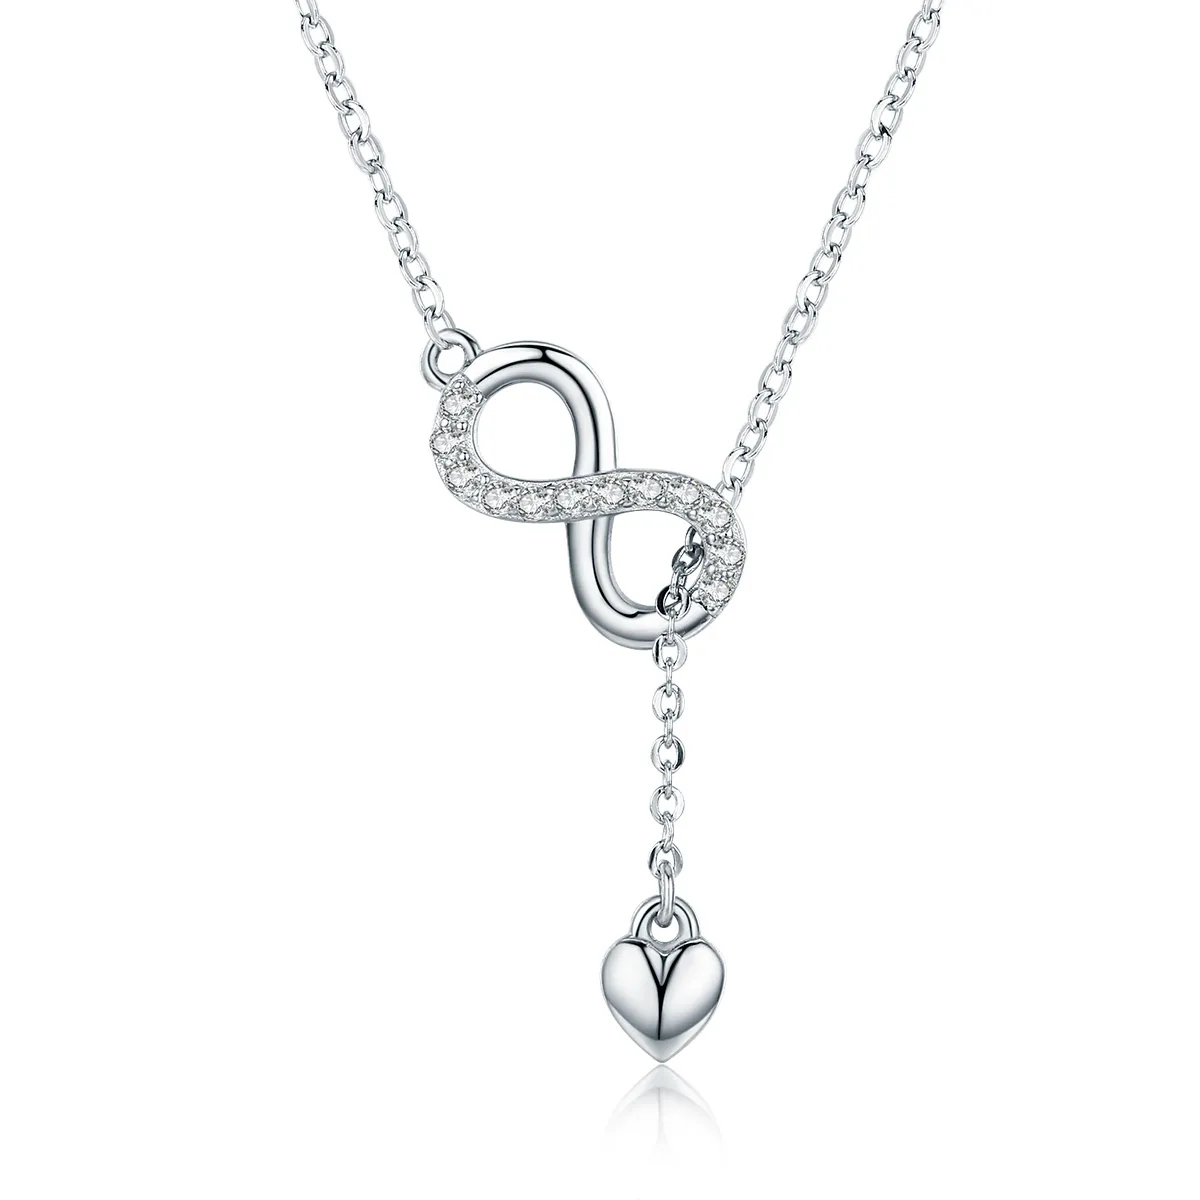 Pandora Style Silver Infinite Charm Necklace - SCN223